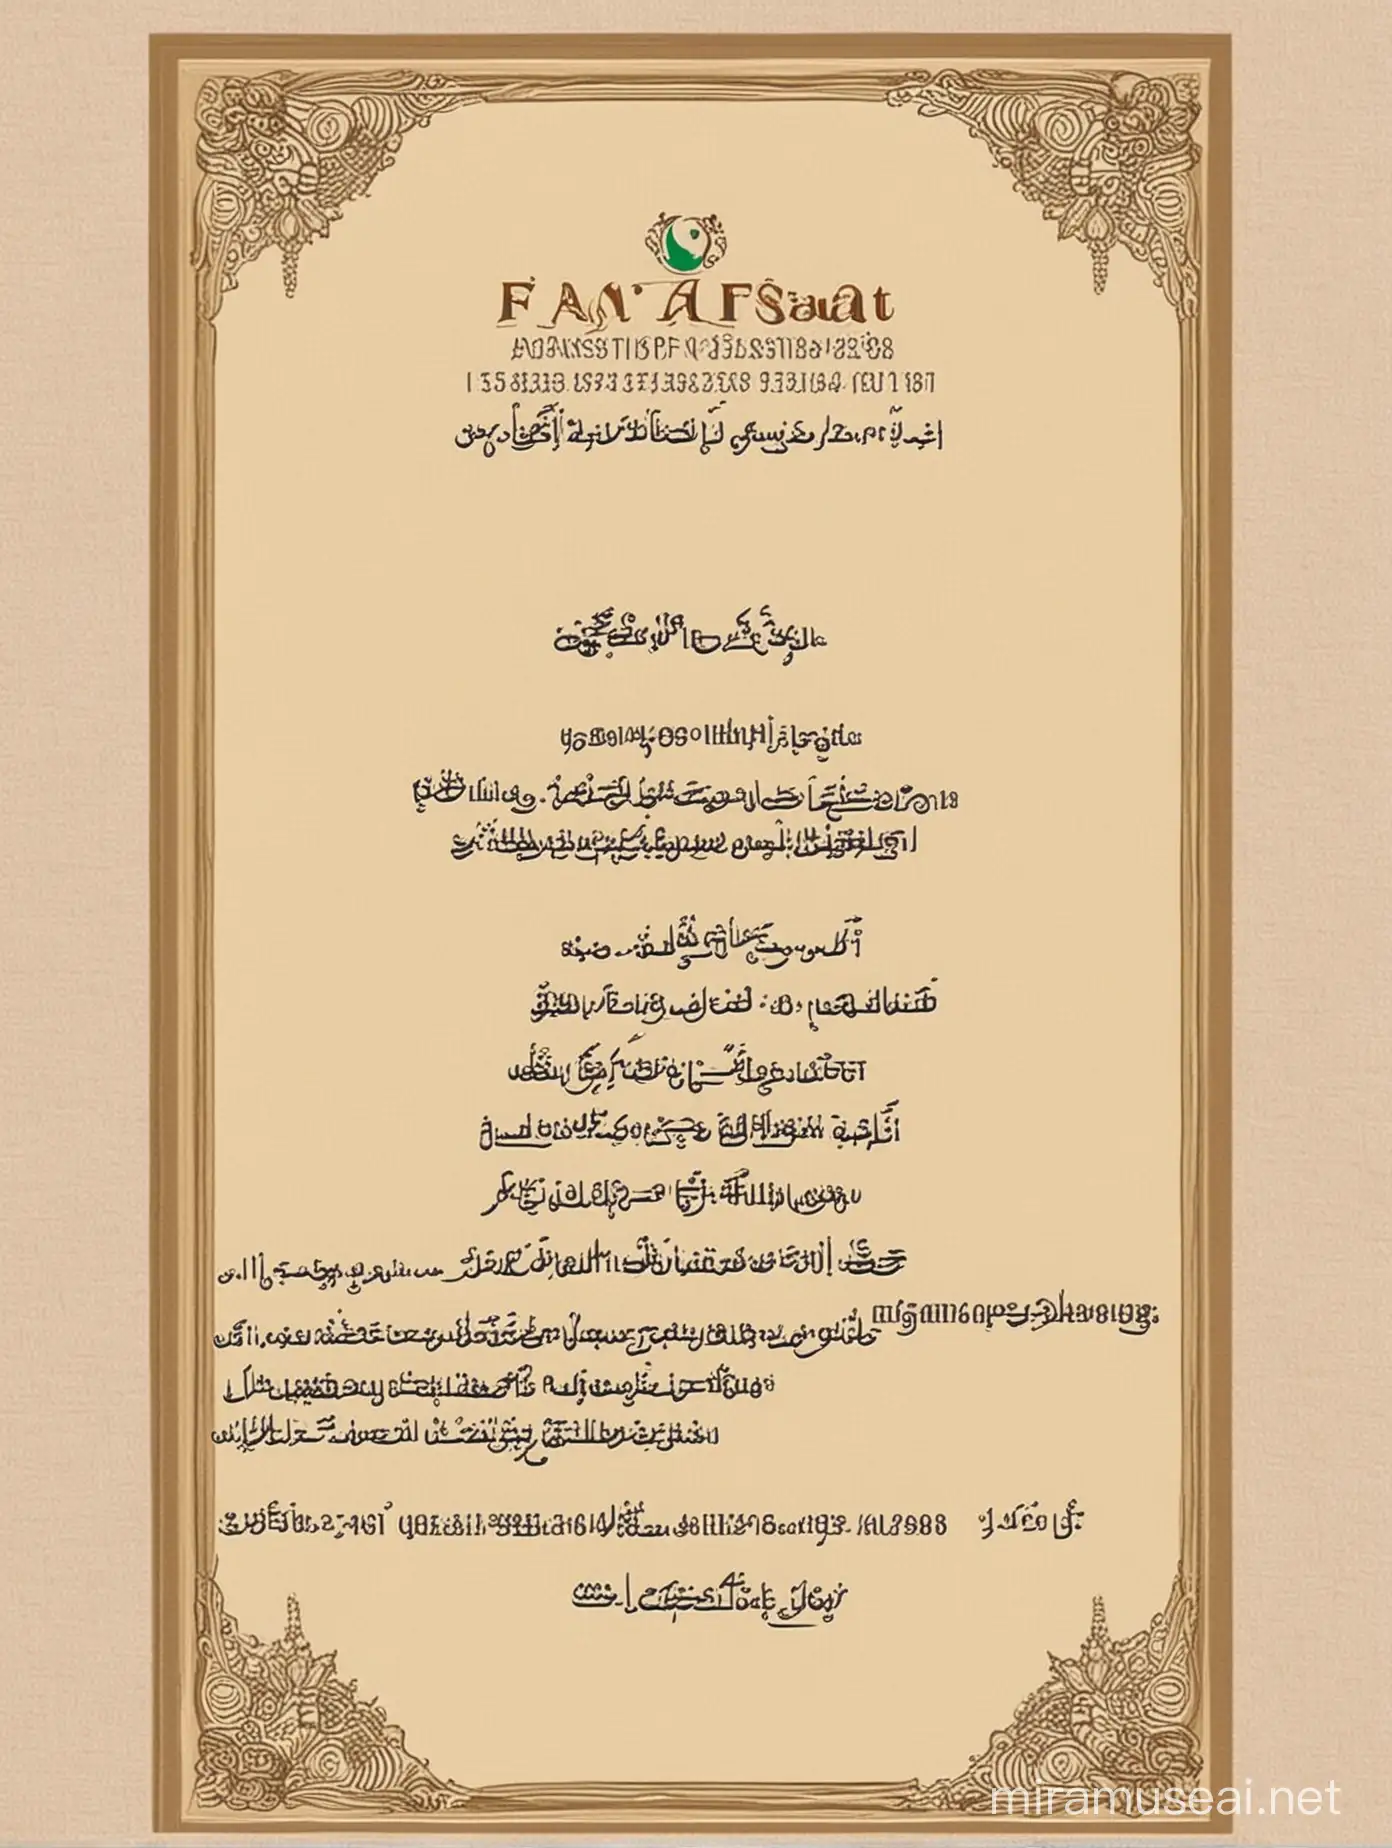 Draw the business card for Farasat Abbas Gift shop Address is Shahi Bazar Luqman Khairpur Mirs and contact number is 03103573334. THE card is in English and fully displayed on screen with the font which must must me easily read?